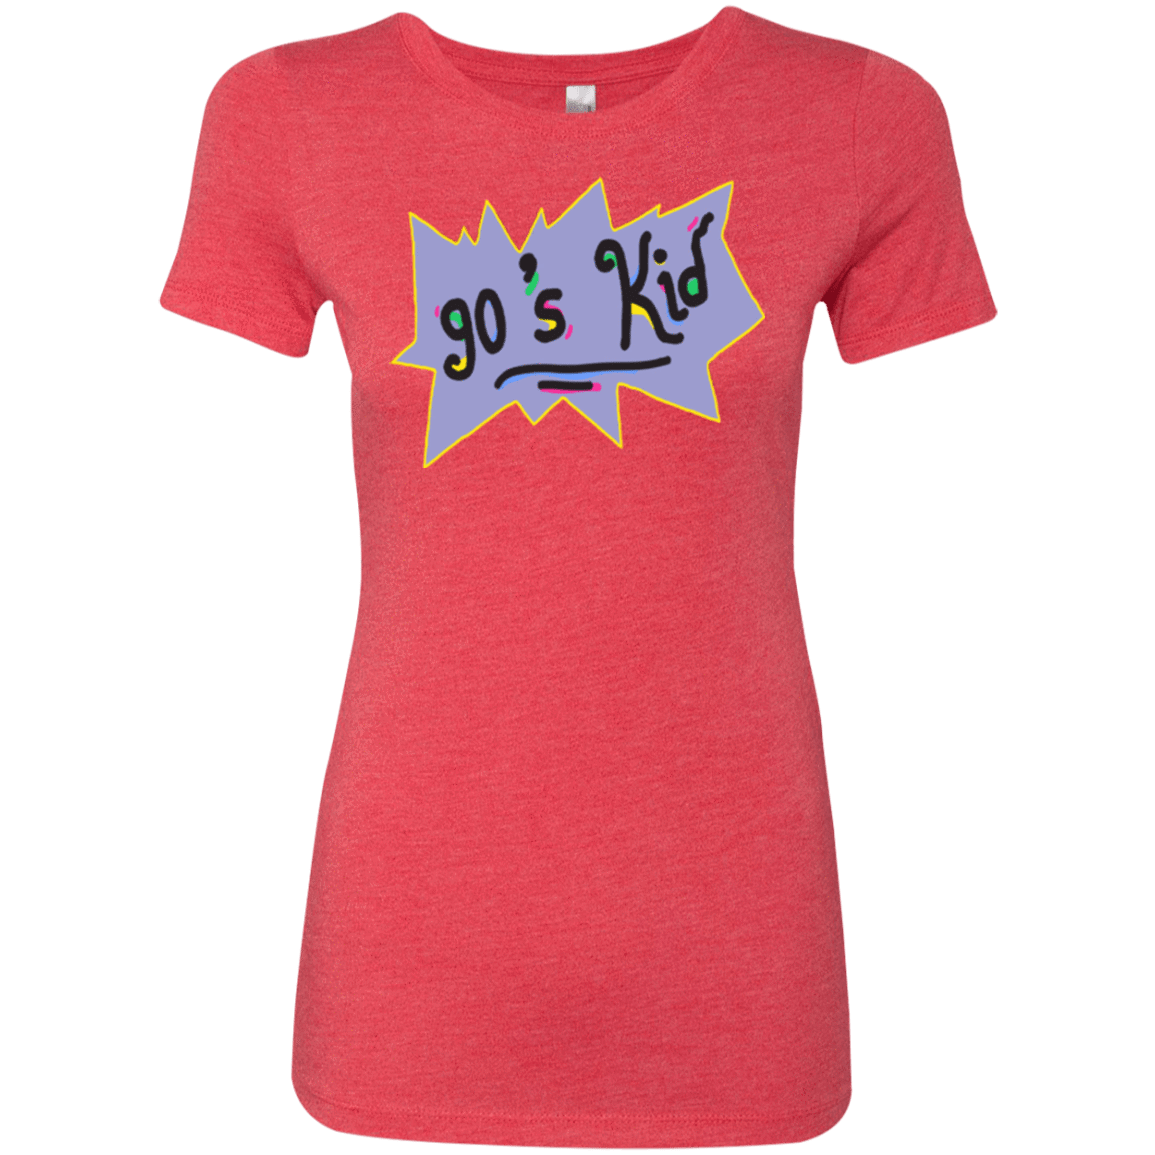 T-Shirts Vintage Red / Small 90's Kid Women's Triblend T-Shirt